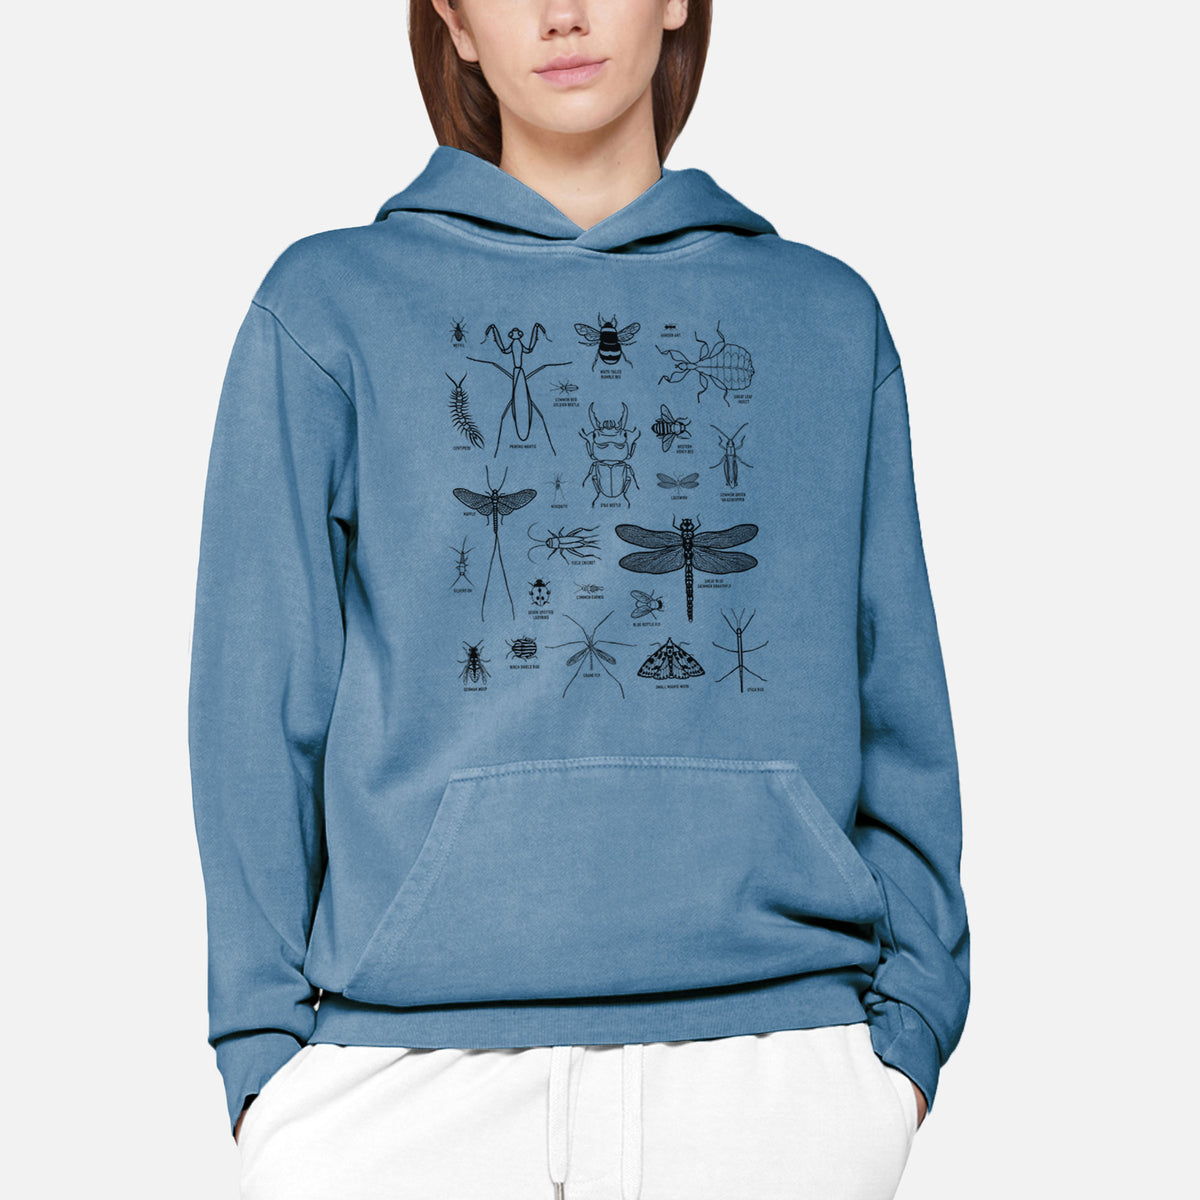 Chart of Arthropods/Insects  - Urban Heavyweight Hoodie